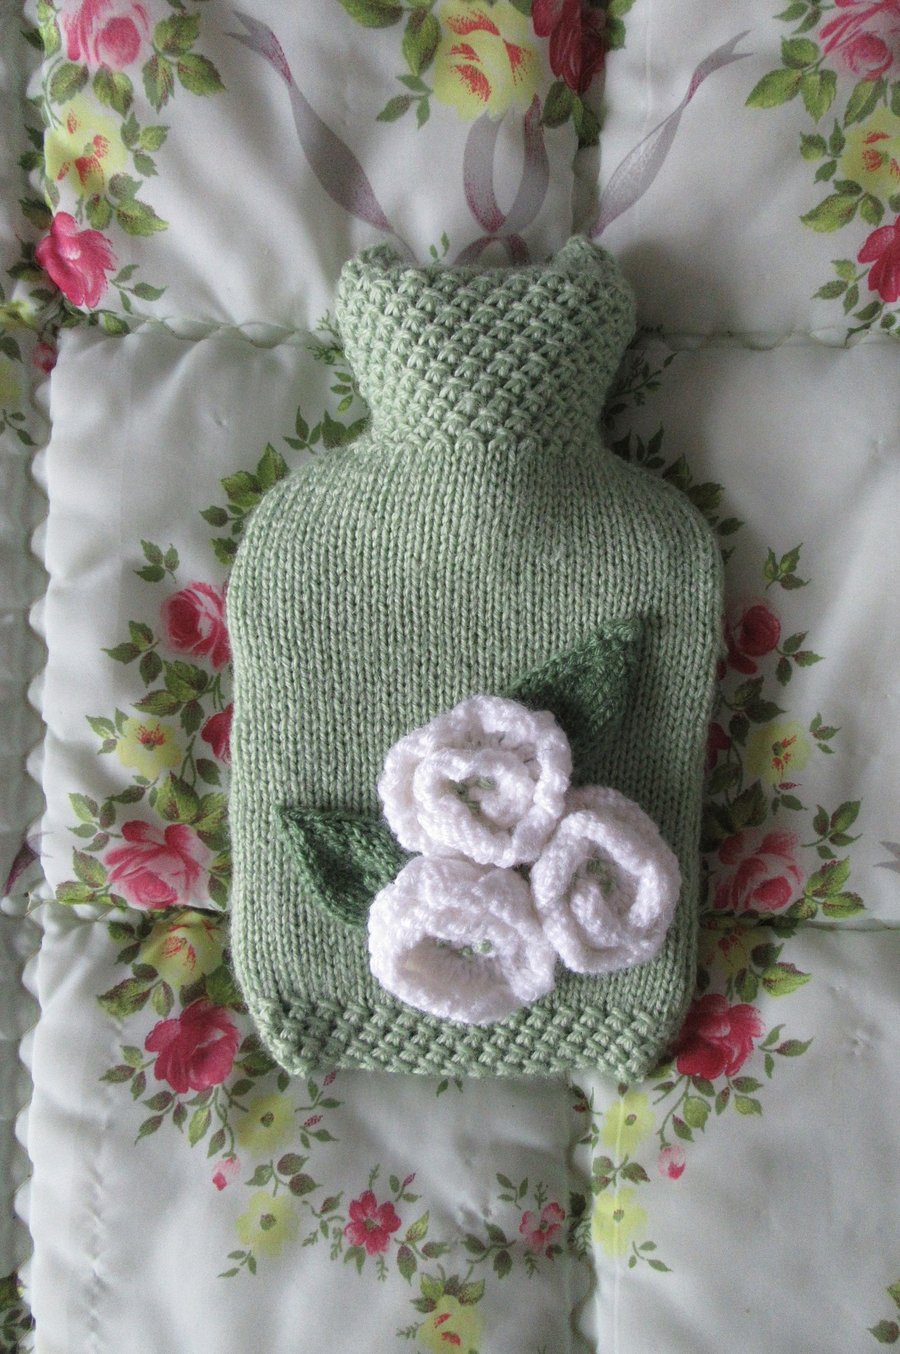 Hand knitted soft green hot water bottle cover with cream roses